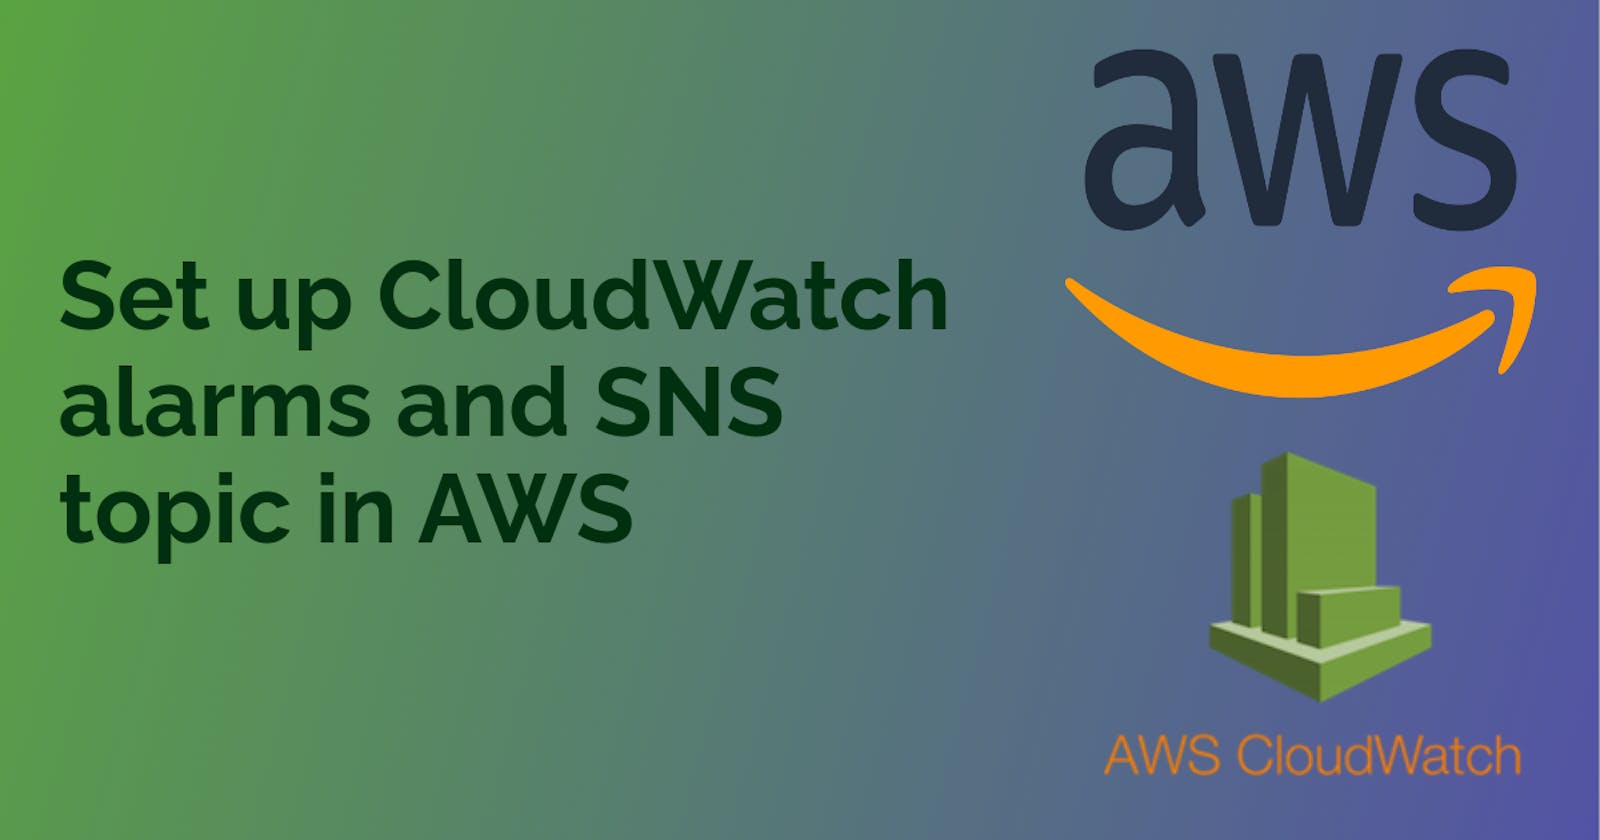 Set up CloudWatch alarms and SNS topic in AWS